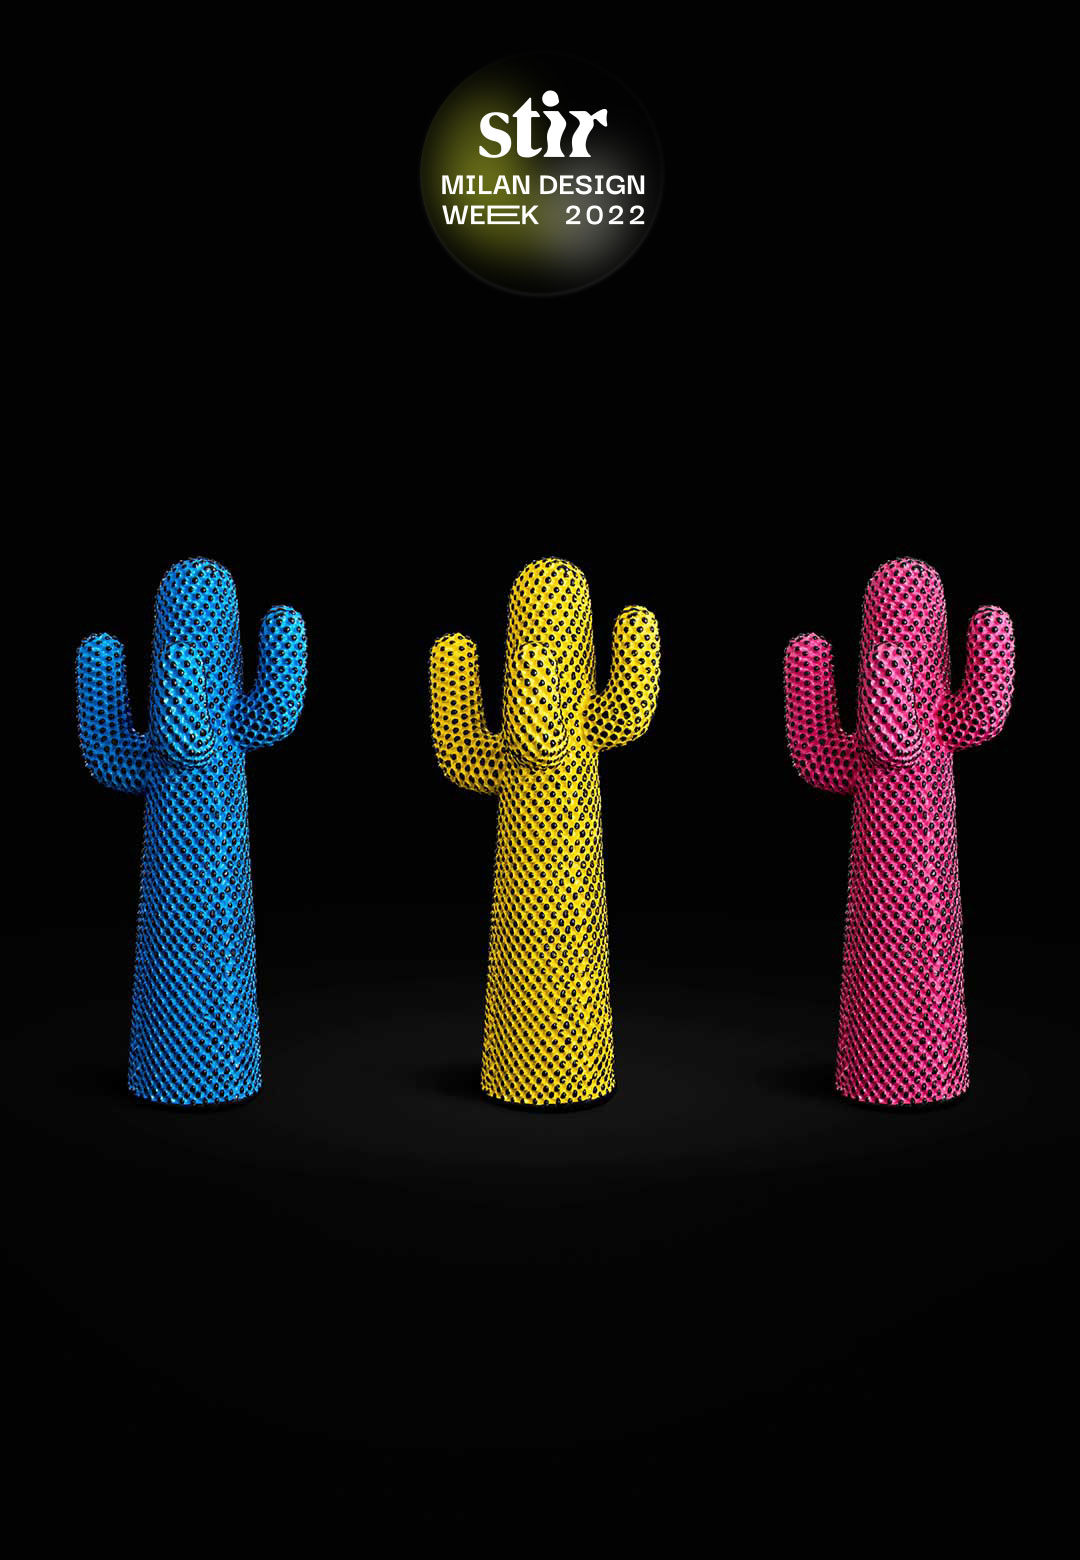 Andy Warhol's vision comes alive in Gufram's 50th anniversary Cactus